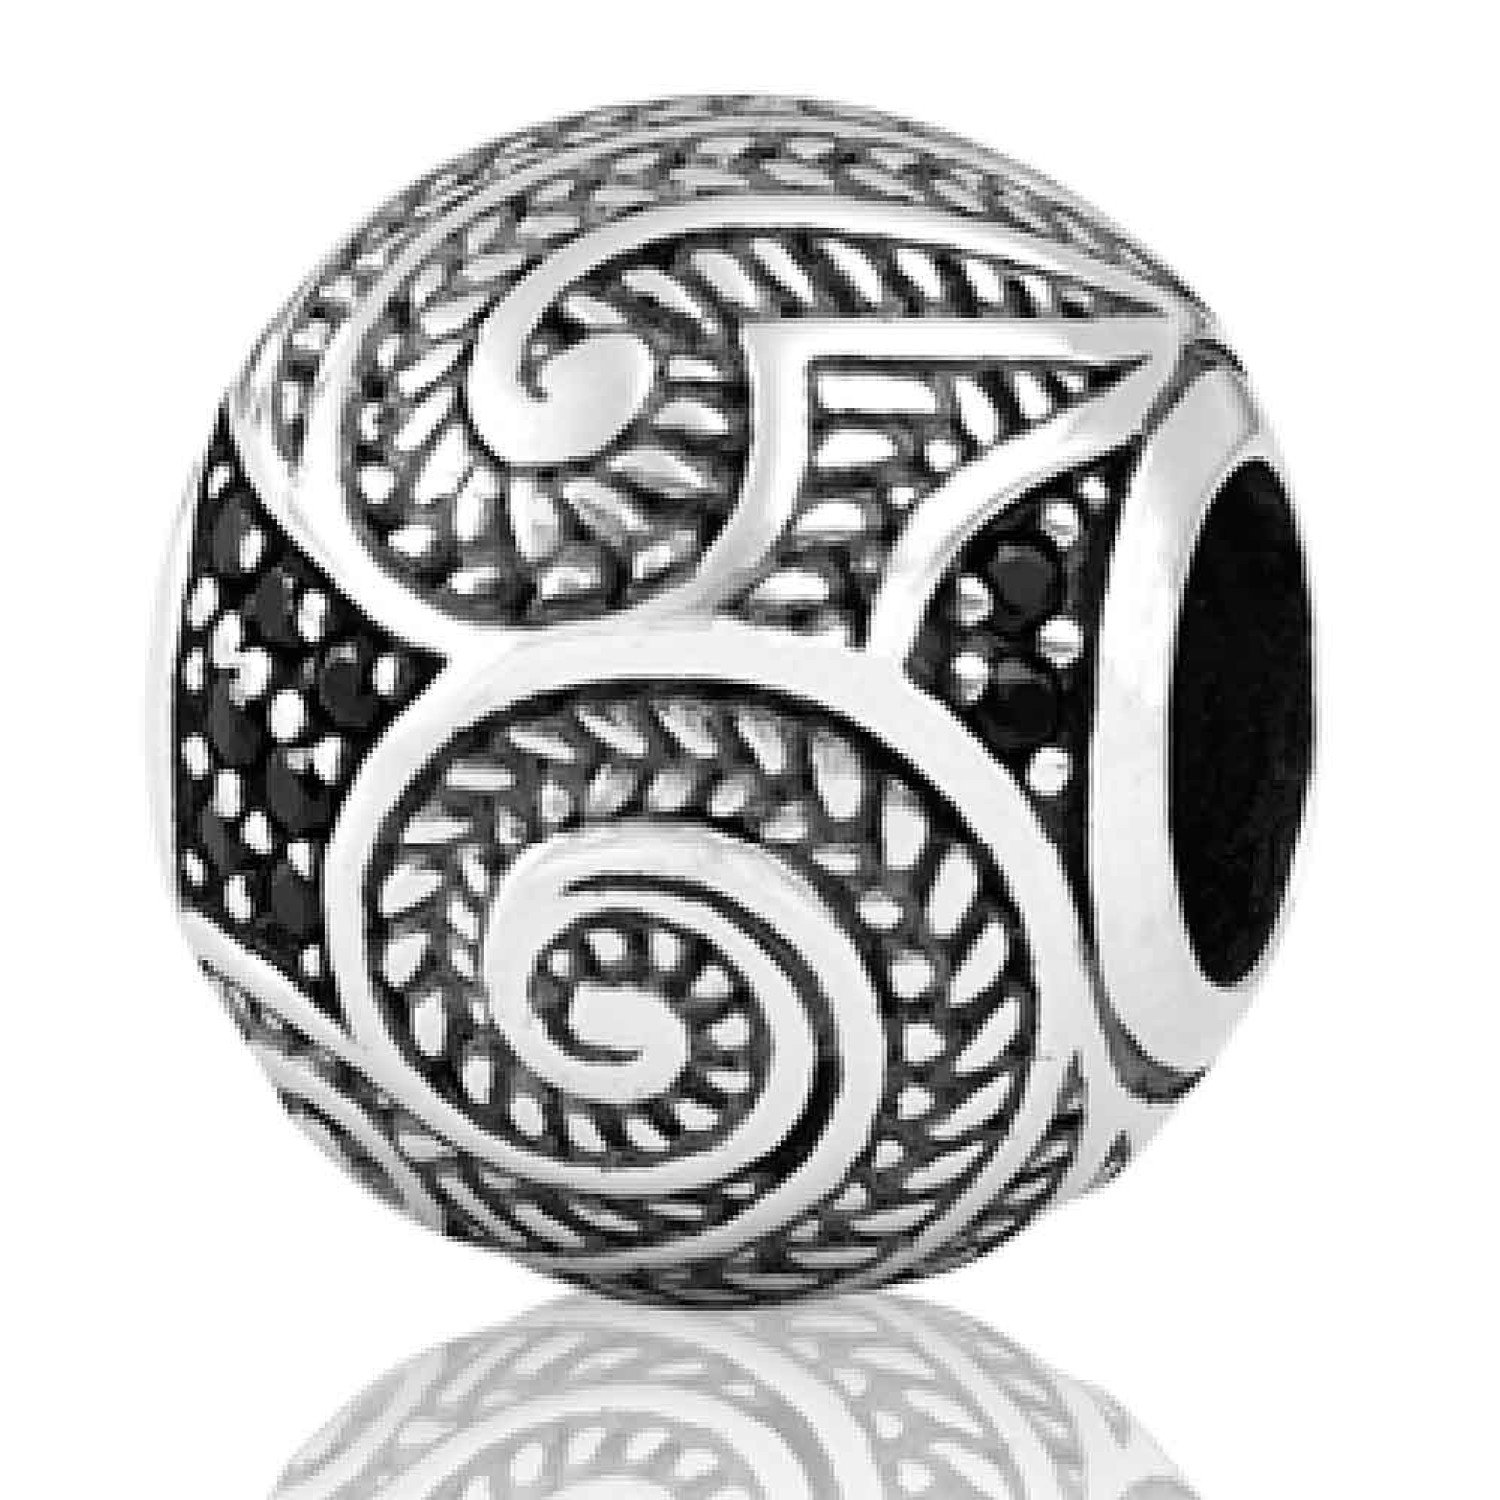 LK242SP Evolve Silver Charm Shining Koru. Inspired by Ranginui, the sky father, the swirling koru patterns and dazzling black stones celebrate a new chapter in your life, empowering your own personal growth and adventurous spirit.   Available in store @ch